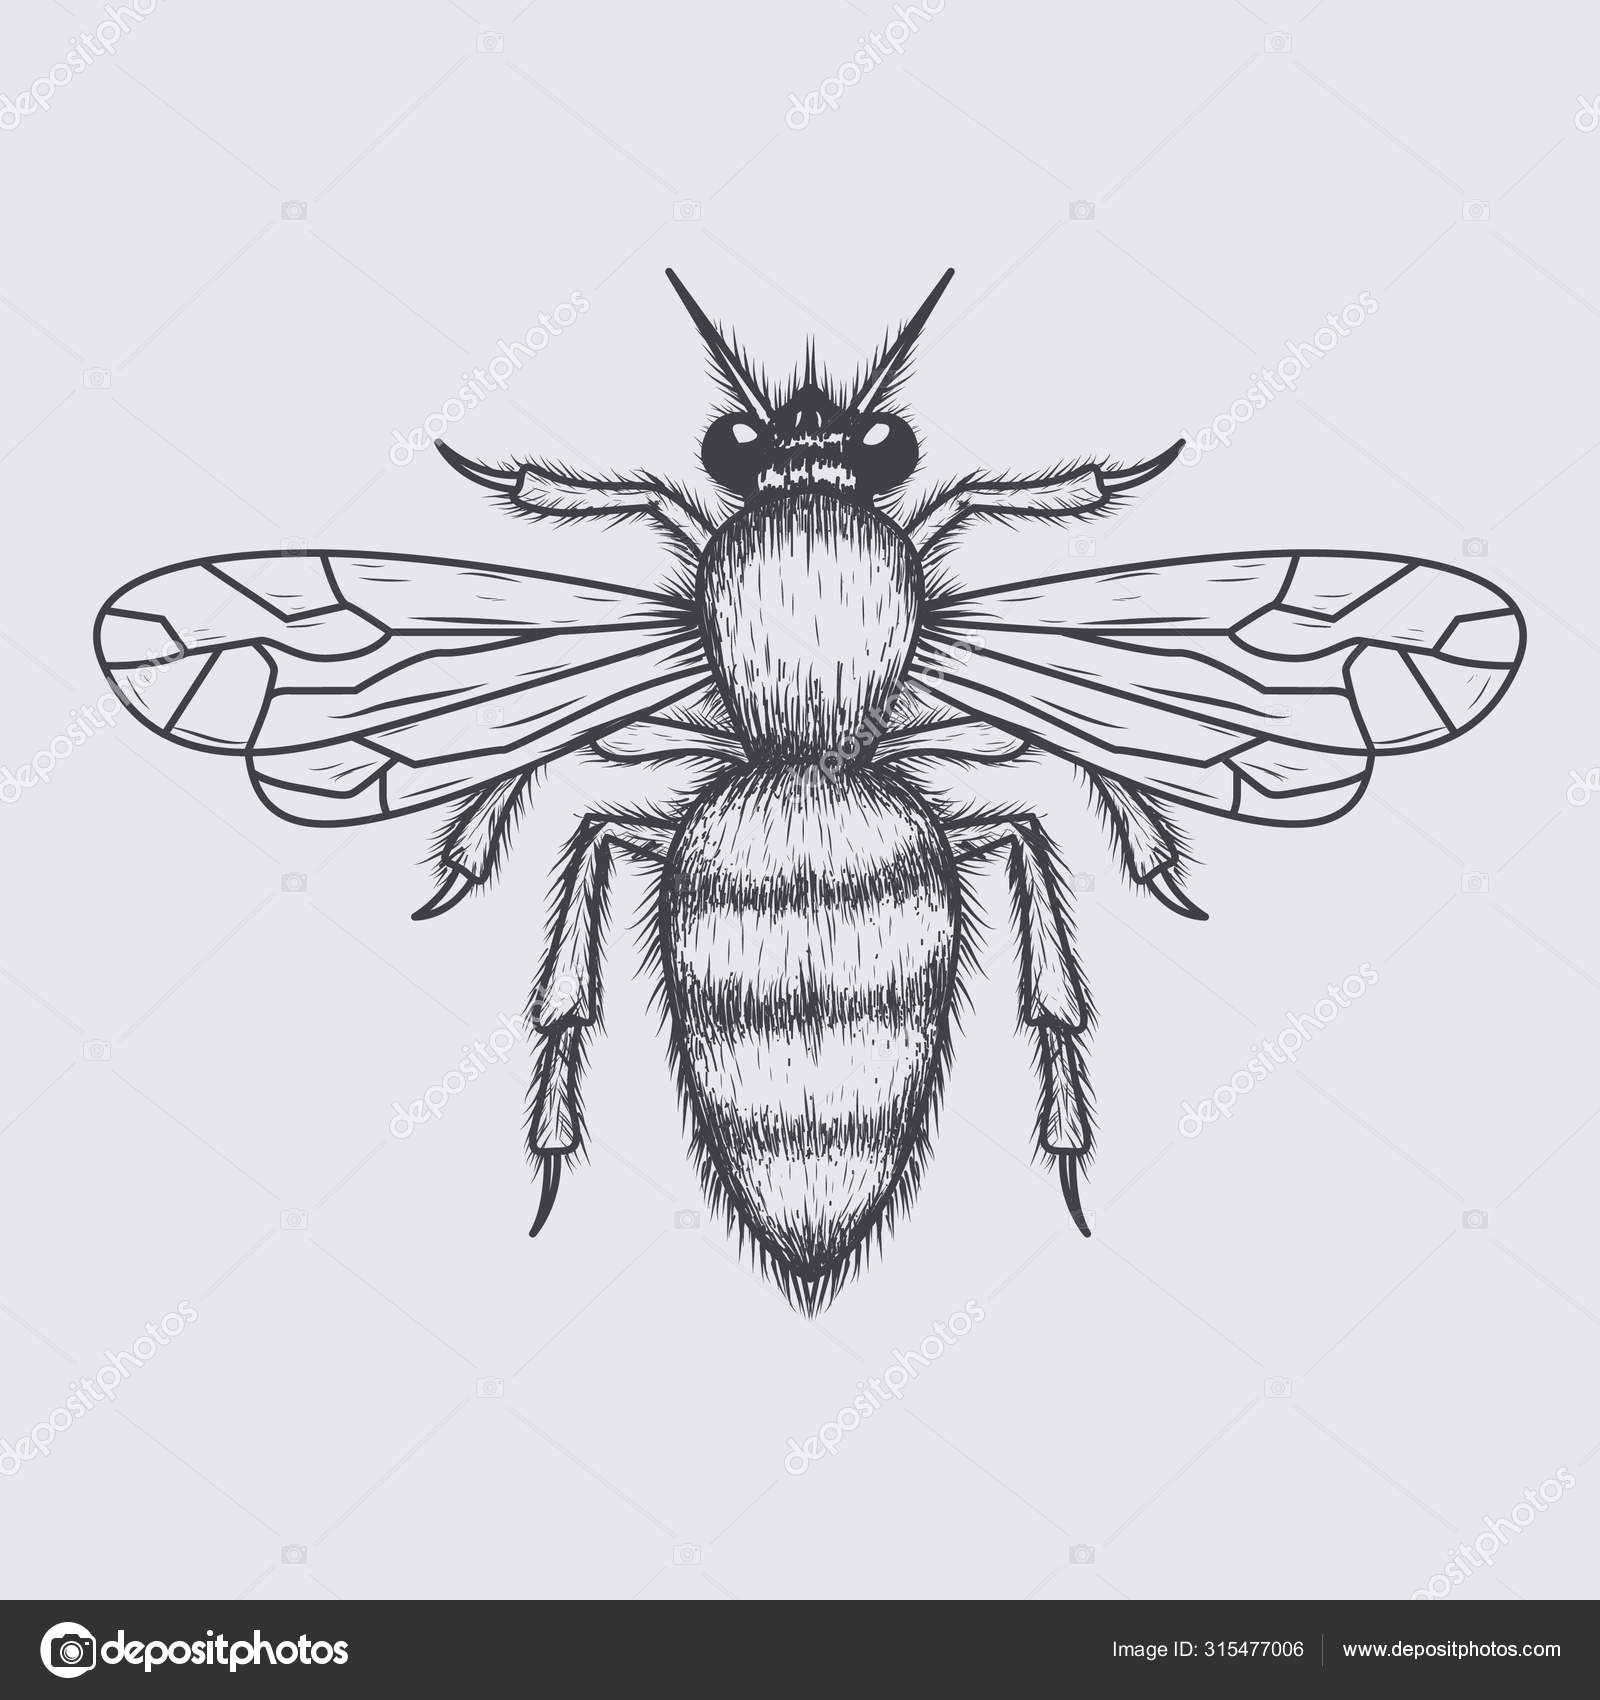 Bee drawings  How to draw a bee  Pencil drawings 